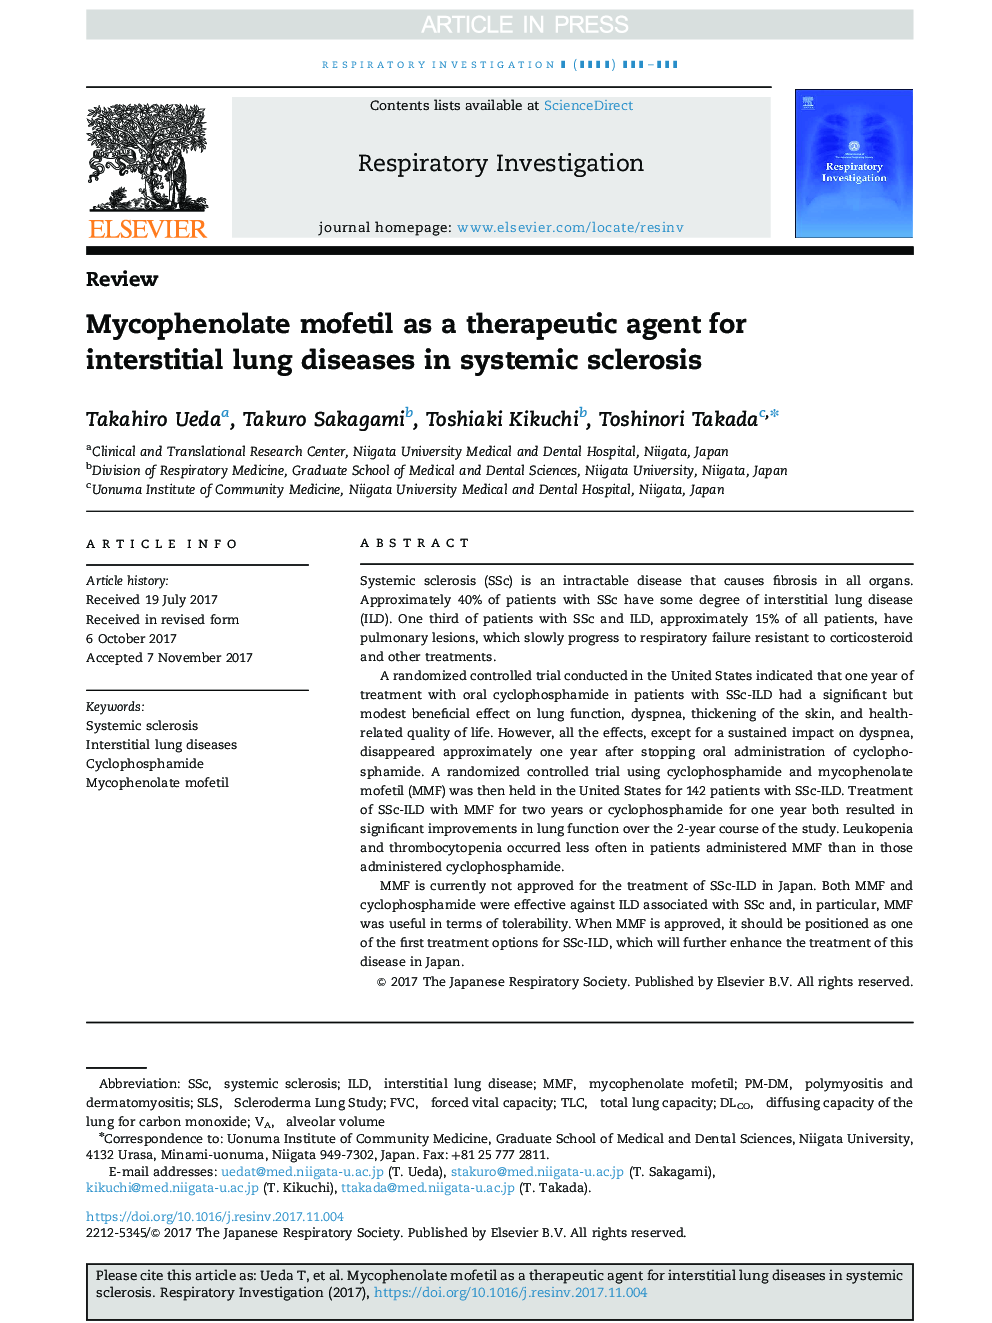 Mycophenolate mofetil as a therapeutic agent for interstitial lung diseases in systemic sclerosis